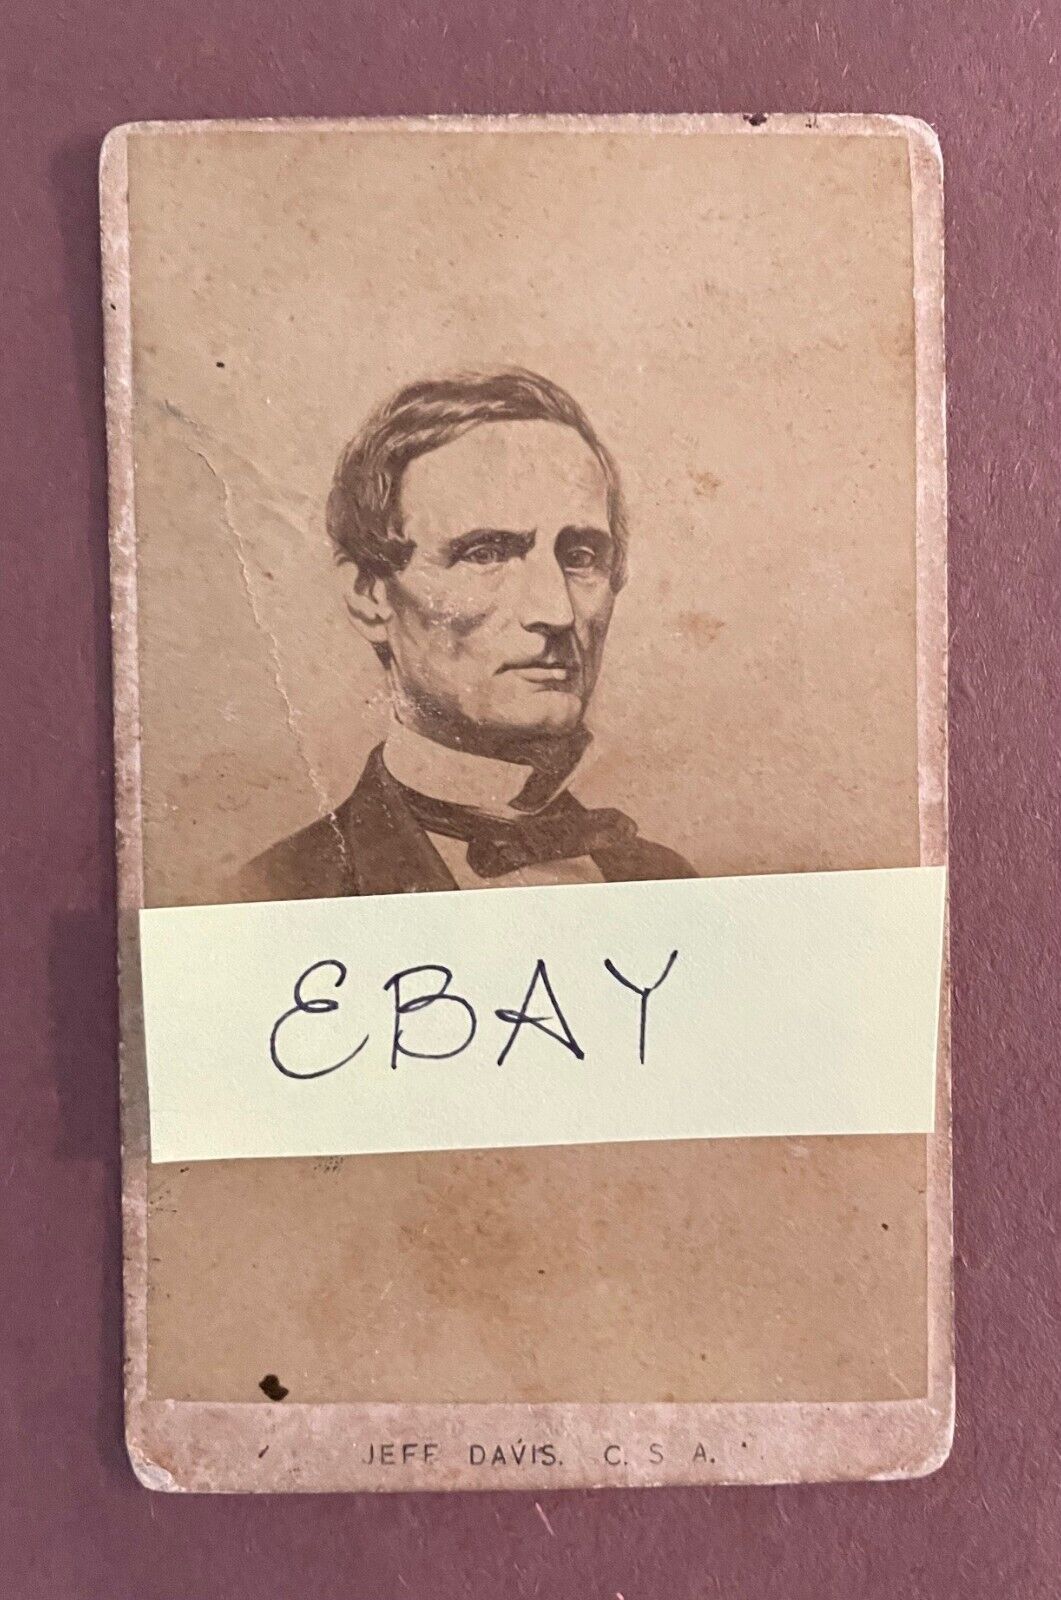 CDV OF CONFEDERACY PRESIDENT JEFFERSON DAVIS without BEARD. RARE FIND for Museum